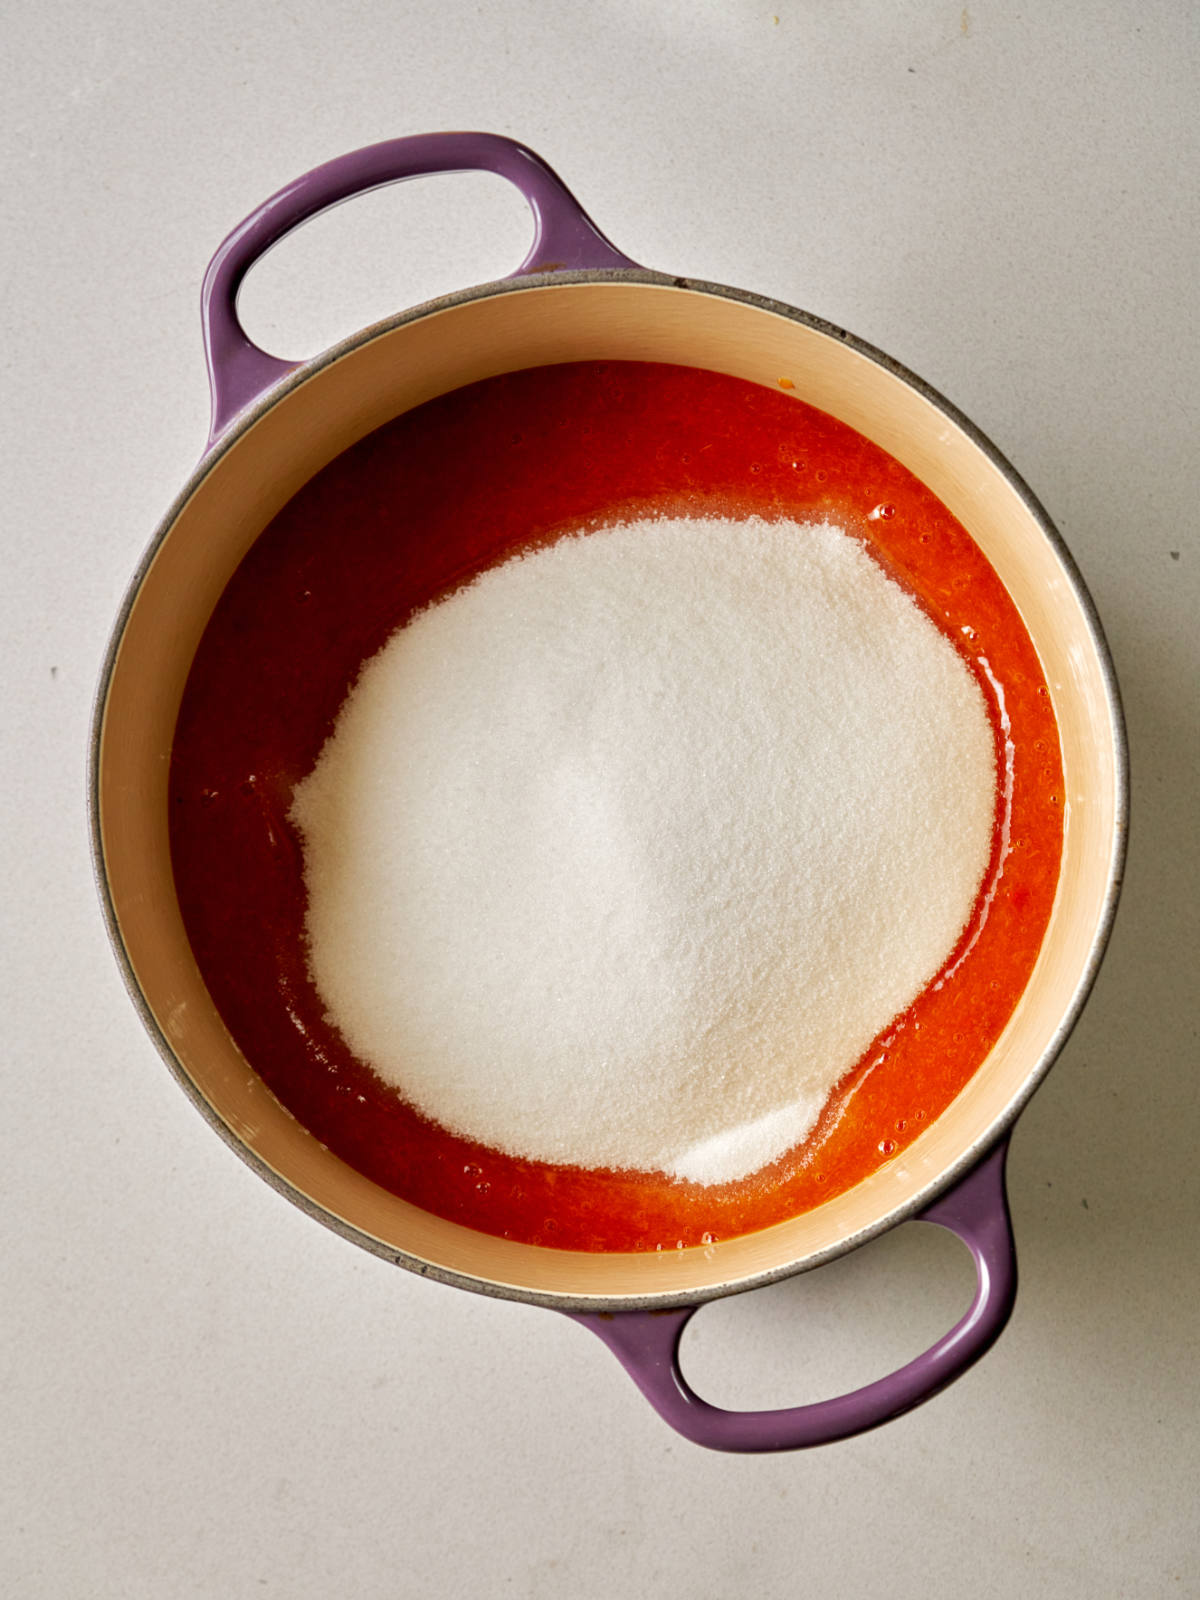 Orange puree in a purple enameled pot with a pile of sugar on it.